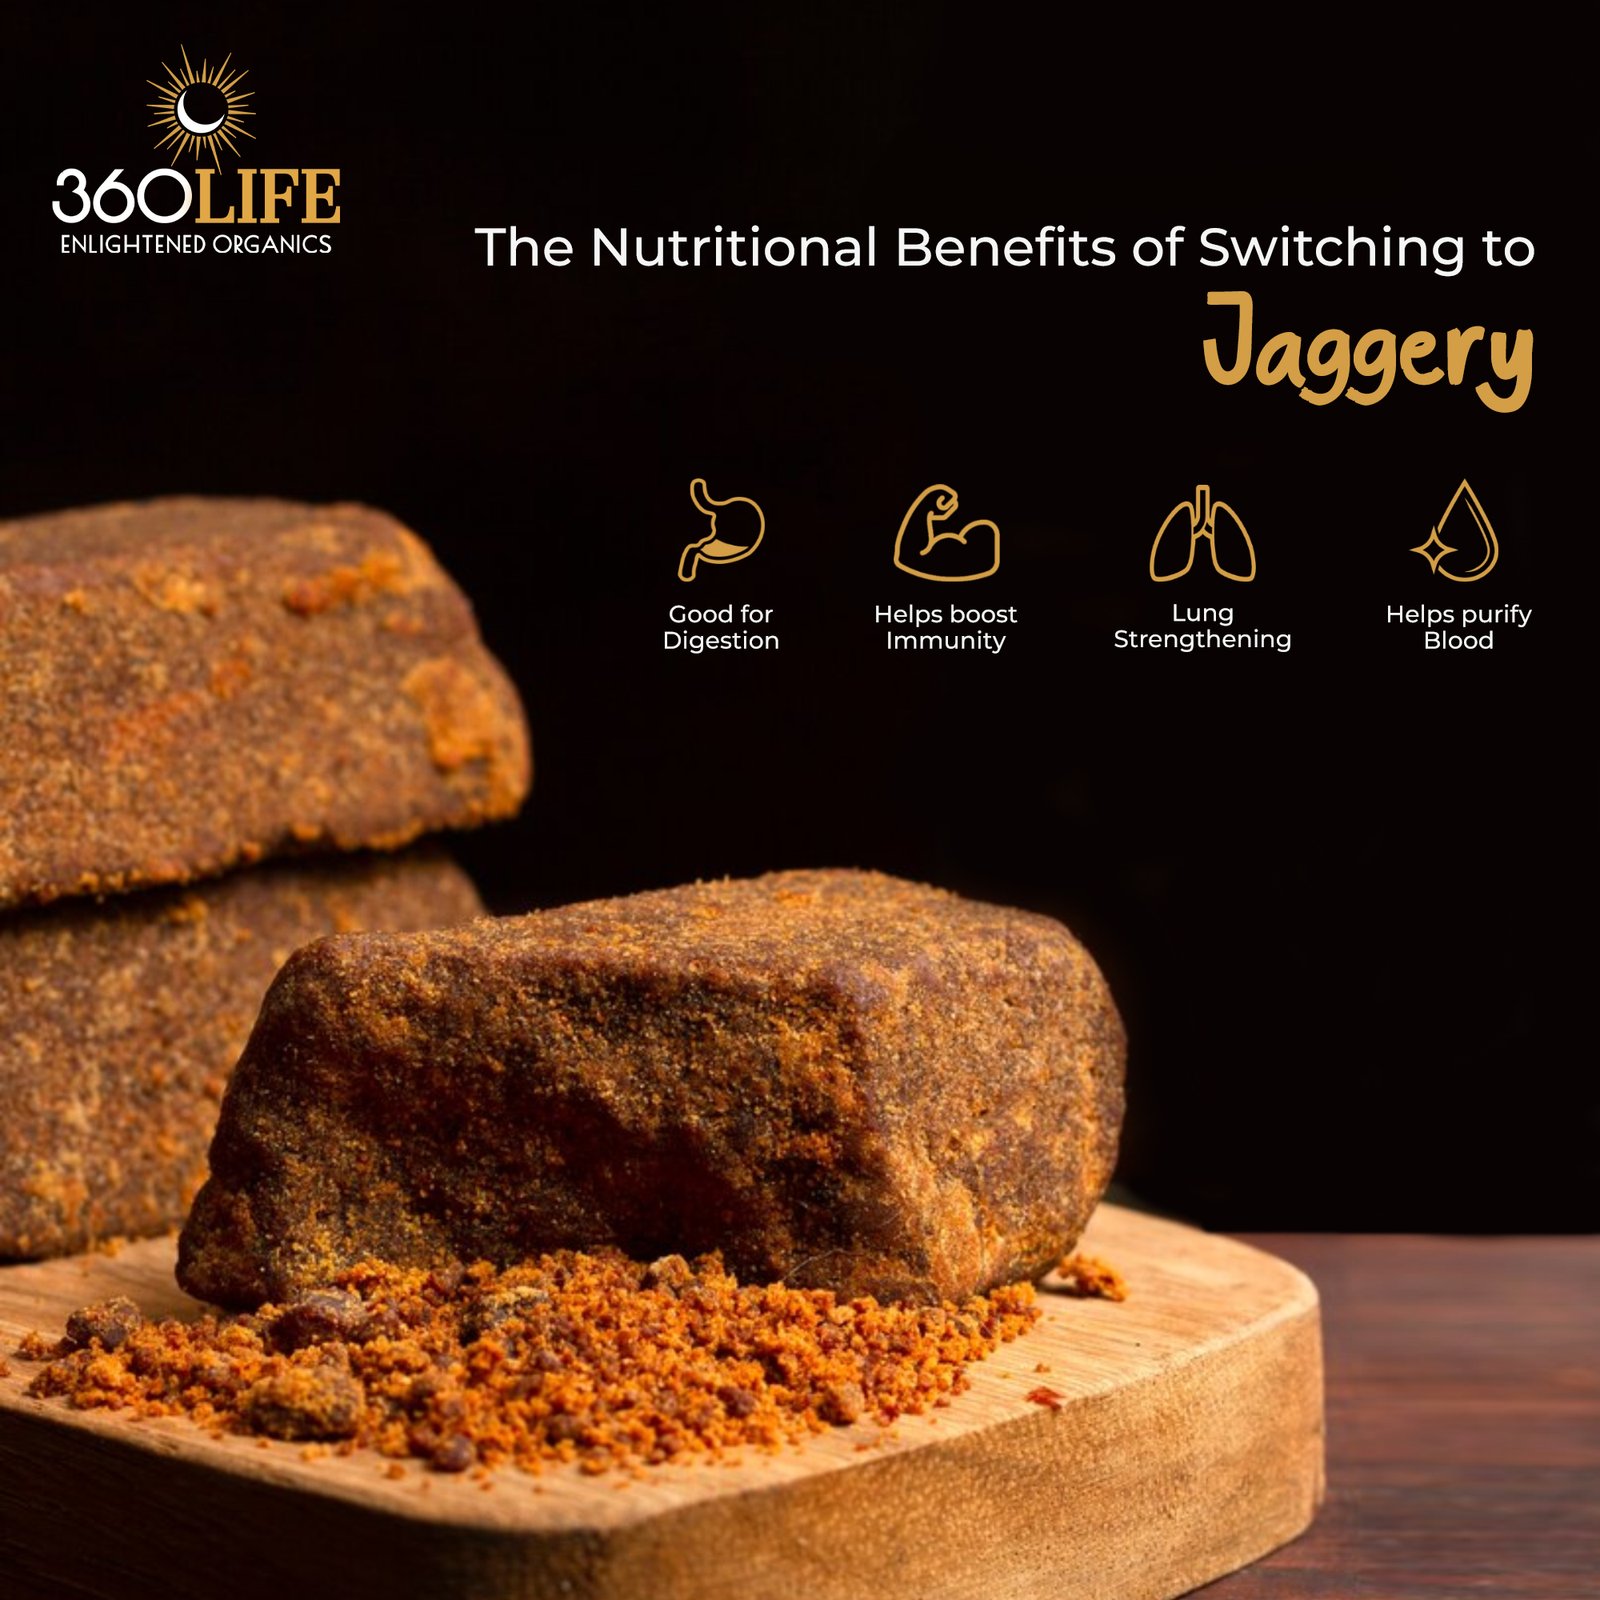 The Nutritional Benefits of Switching to Jaggery